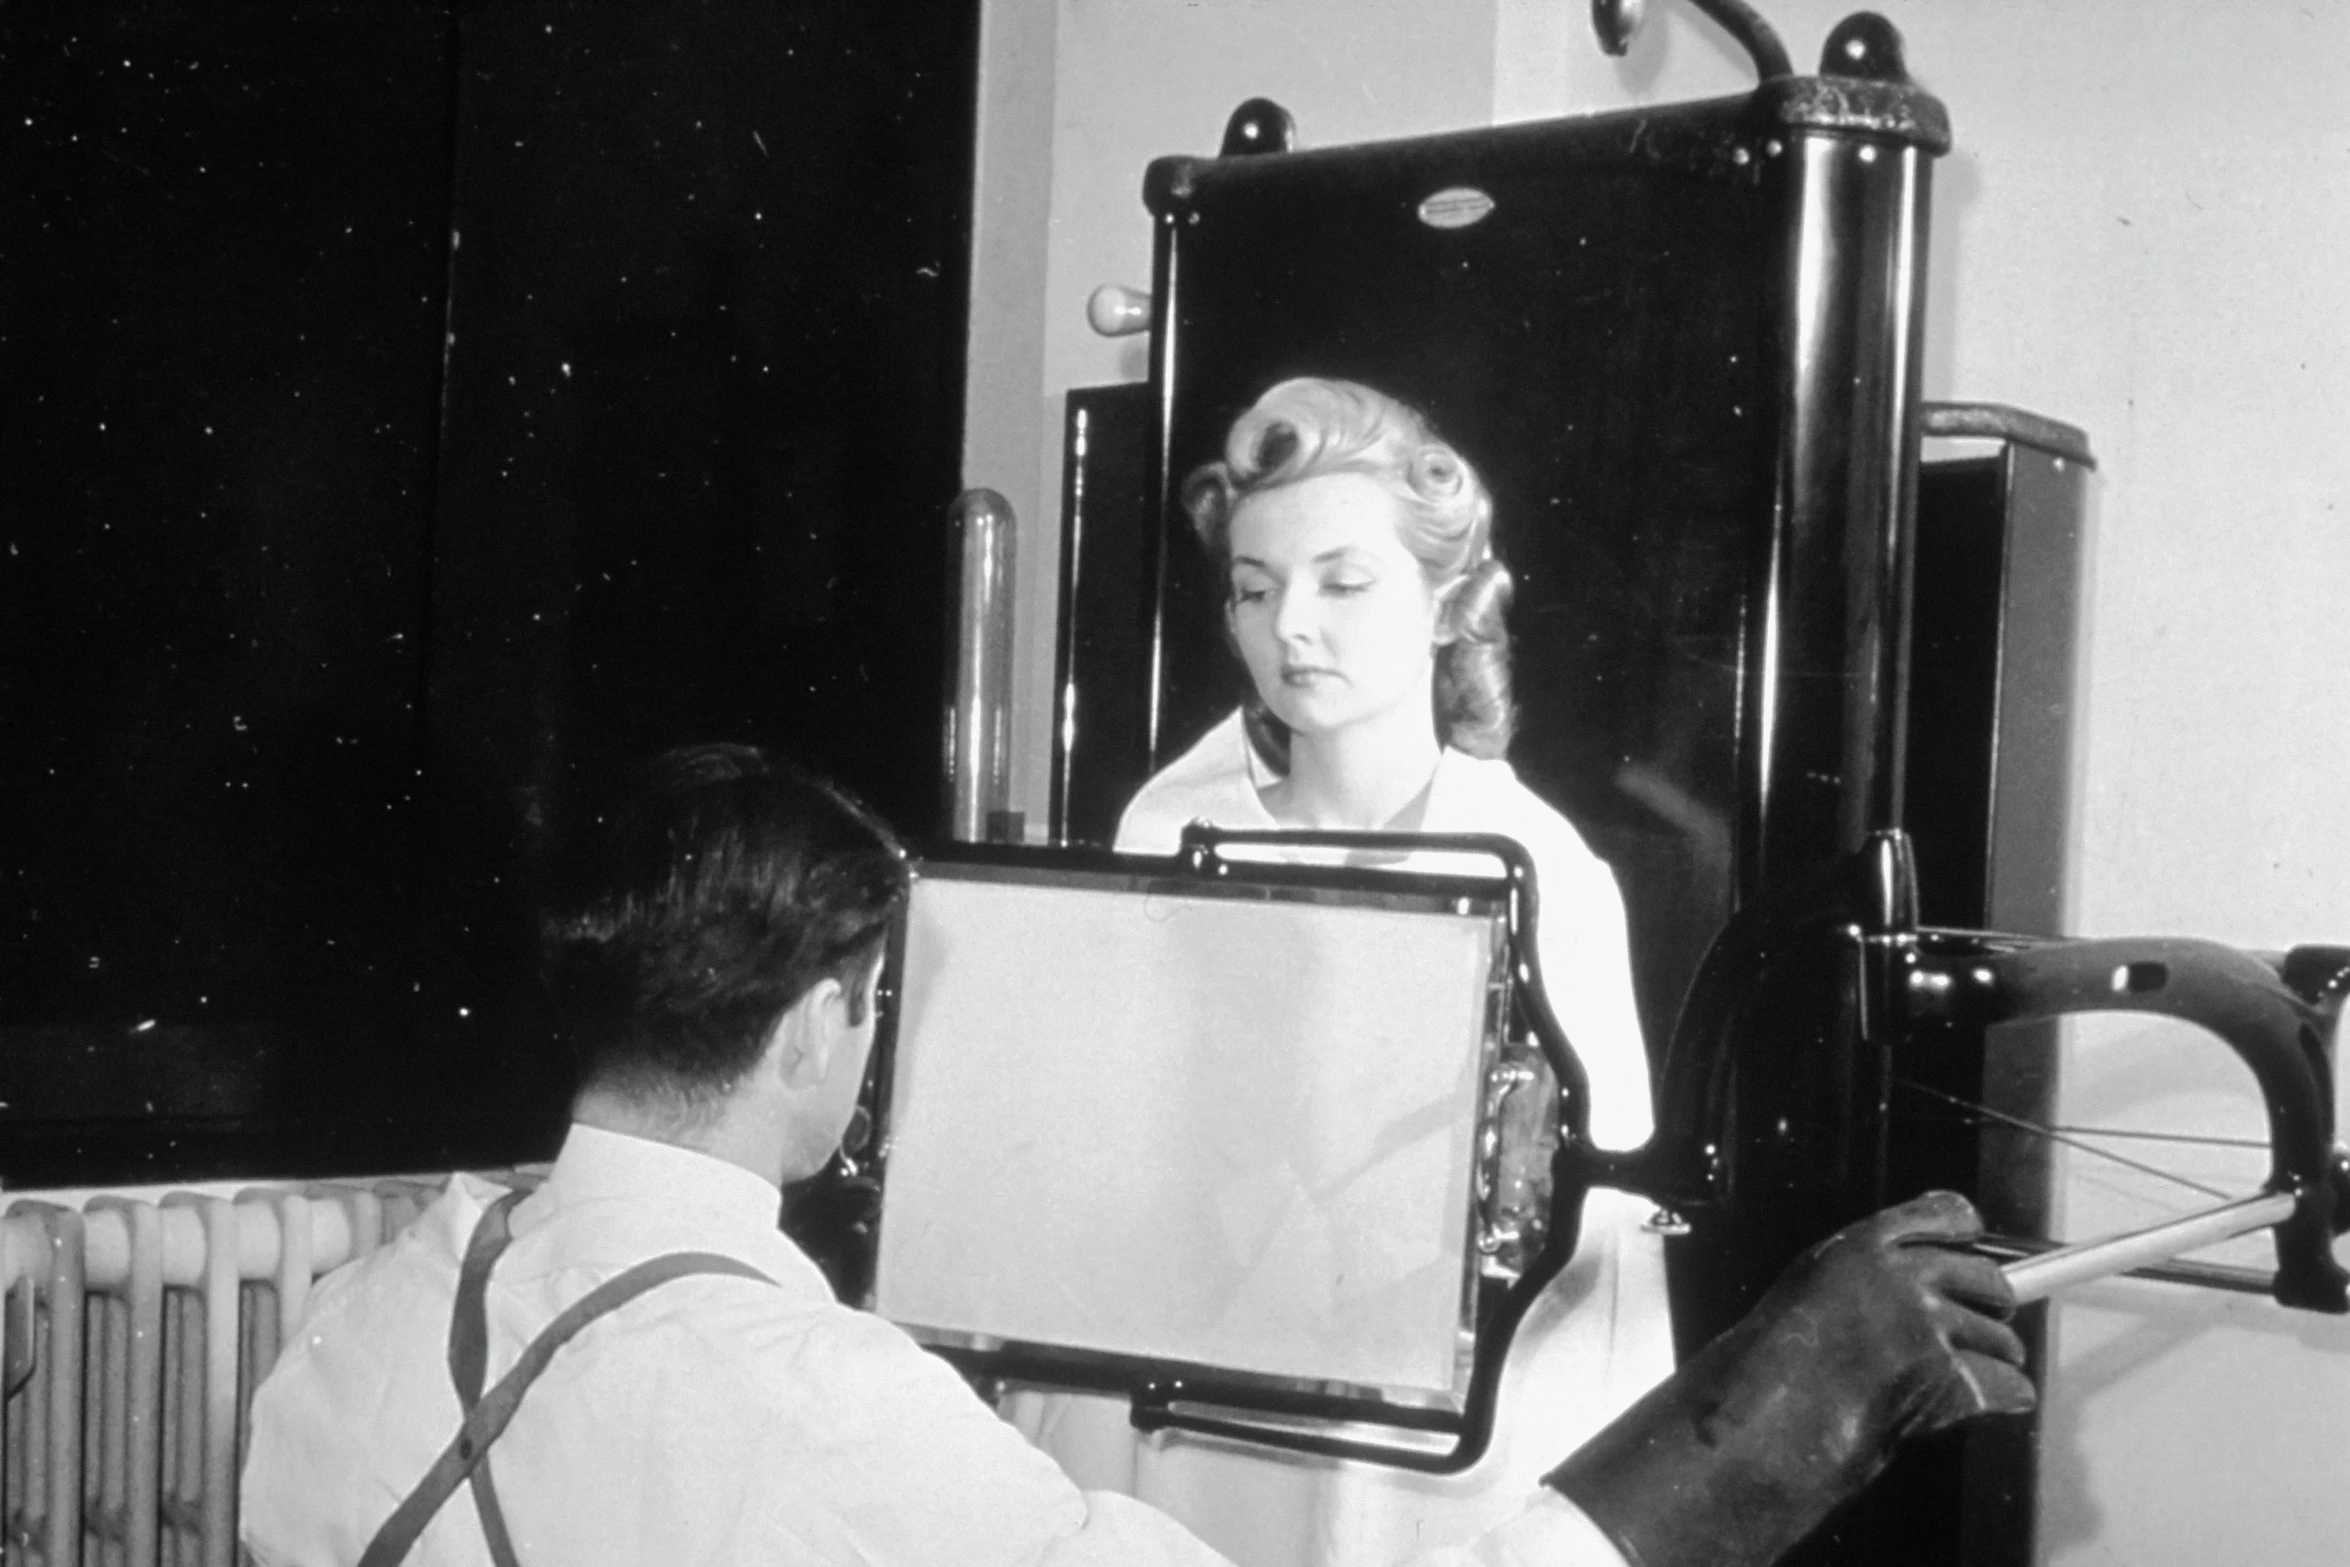 a black and white image of a man taking a pograph of a woman